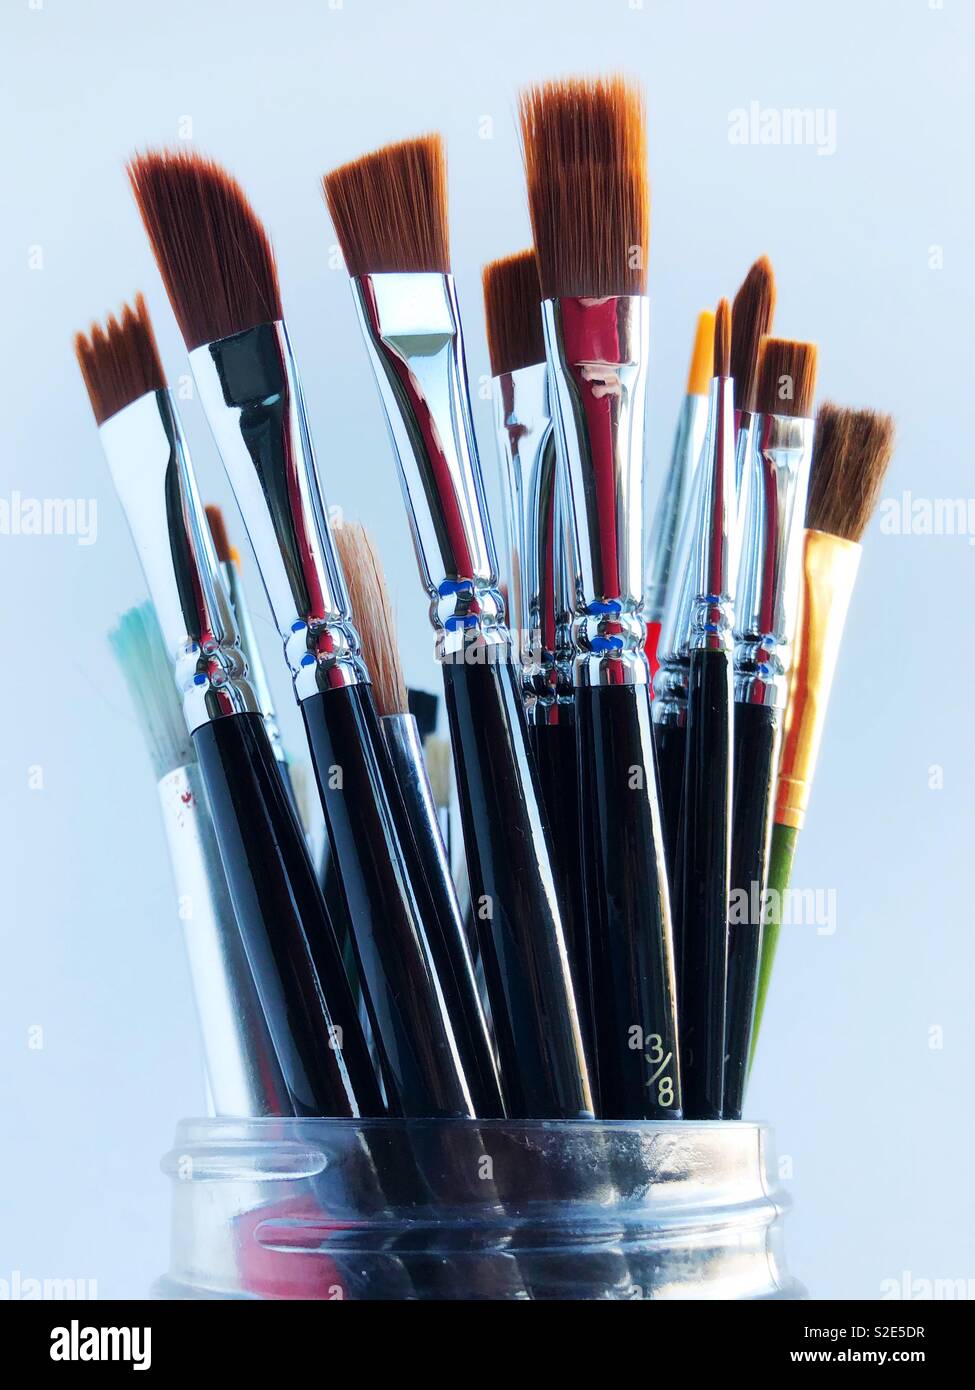 A variety of paintbrushes in a jar. Stock Photo